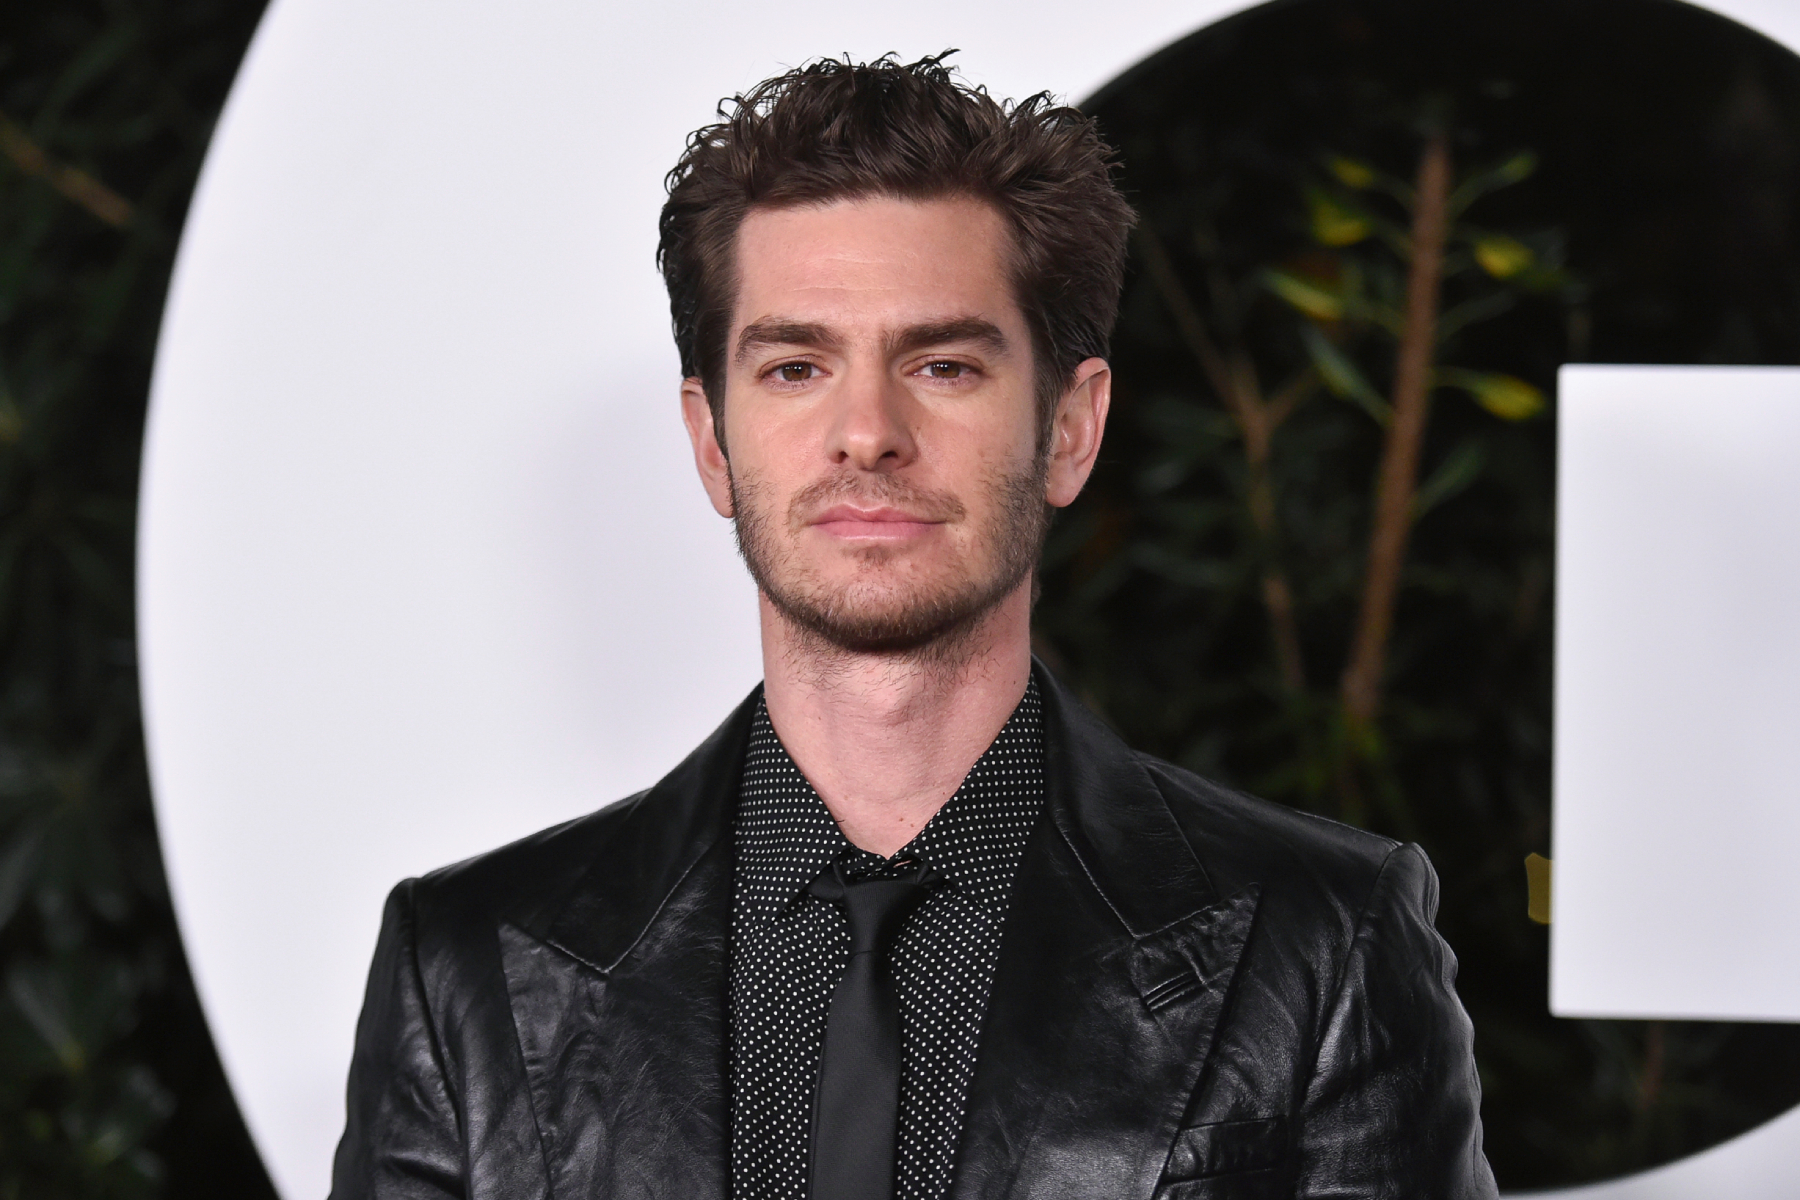 Andrew Garfield Says He’s ‘Definitely Open’ to Another ‘Spider-Man’ Movie